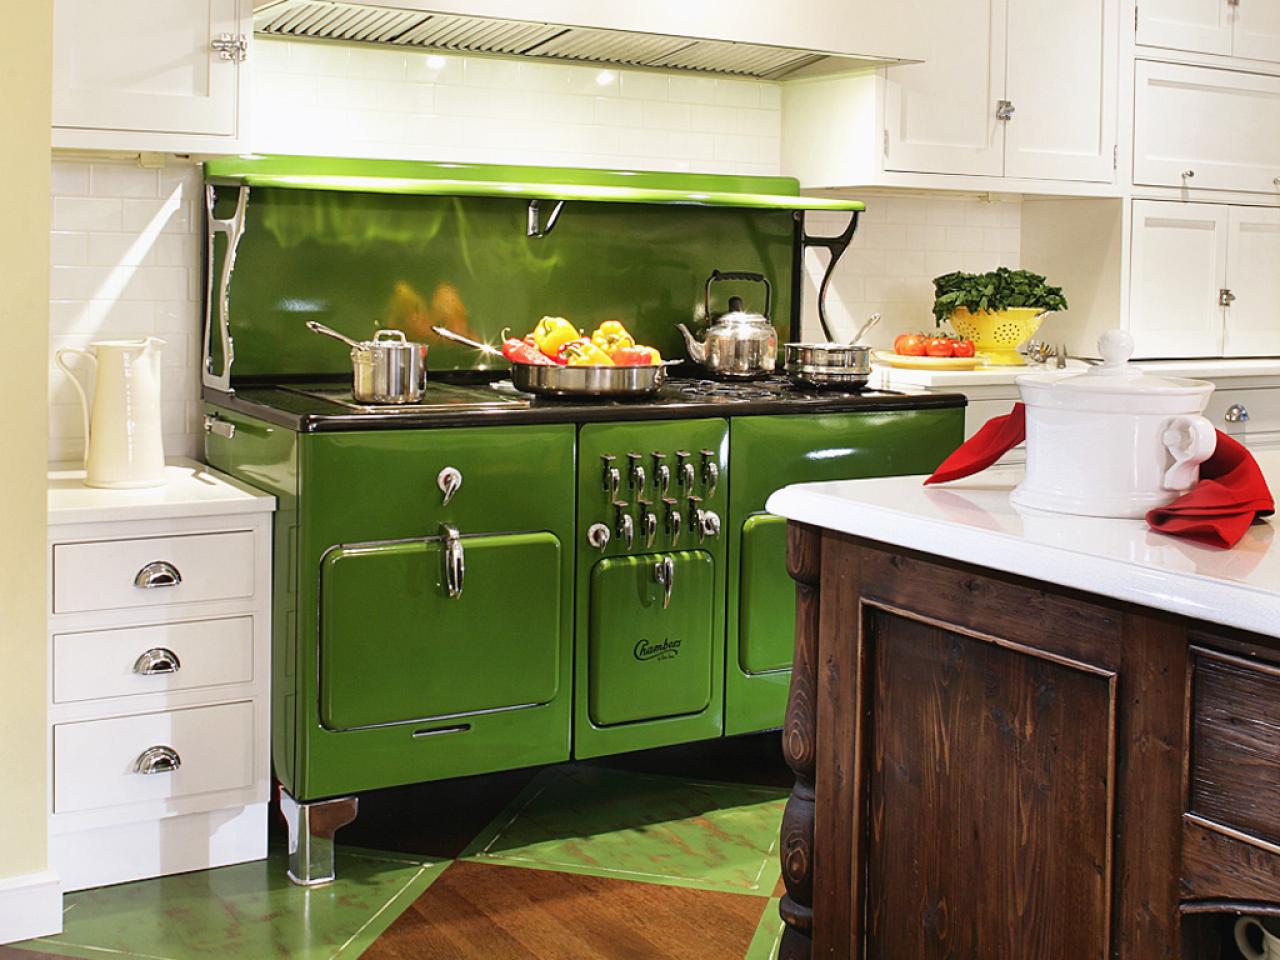 Painting Kitchen Appliances Pictures Ideas From Hgtv Hgtv